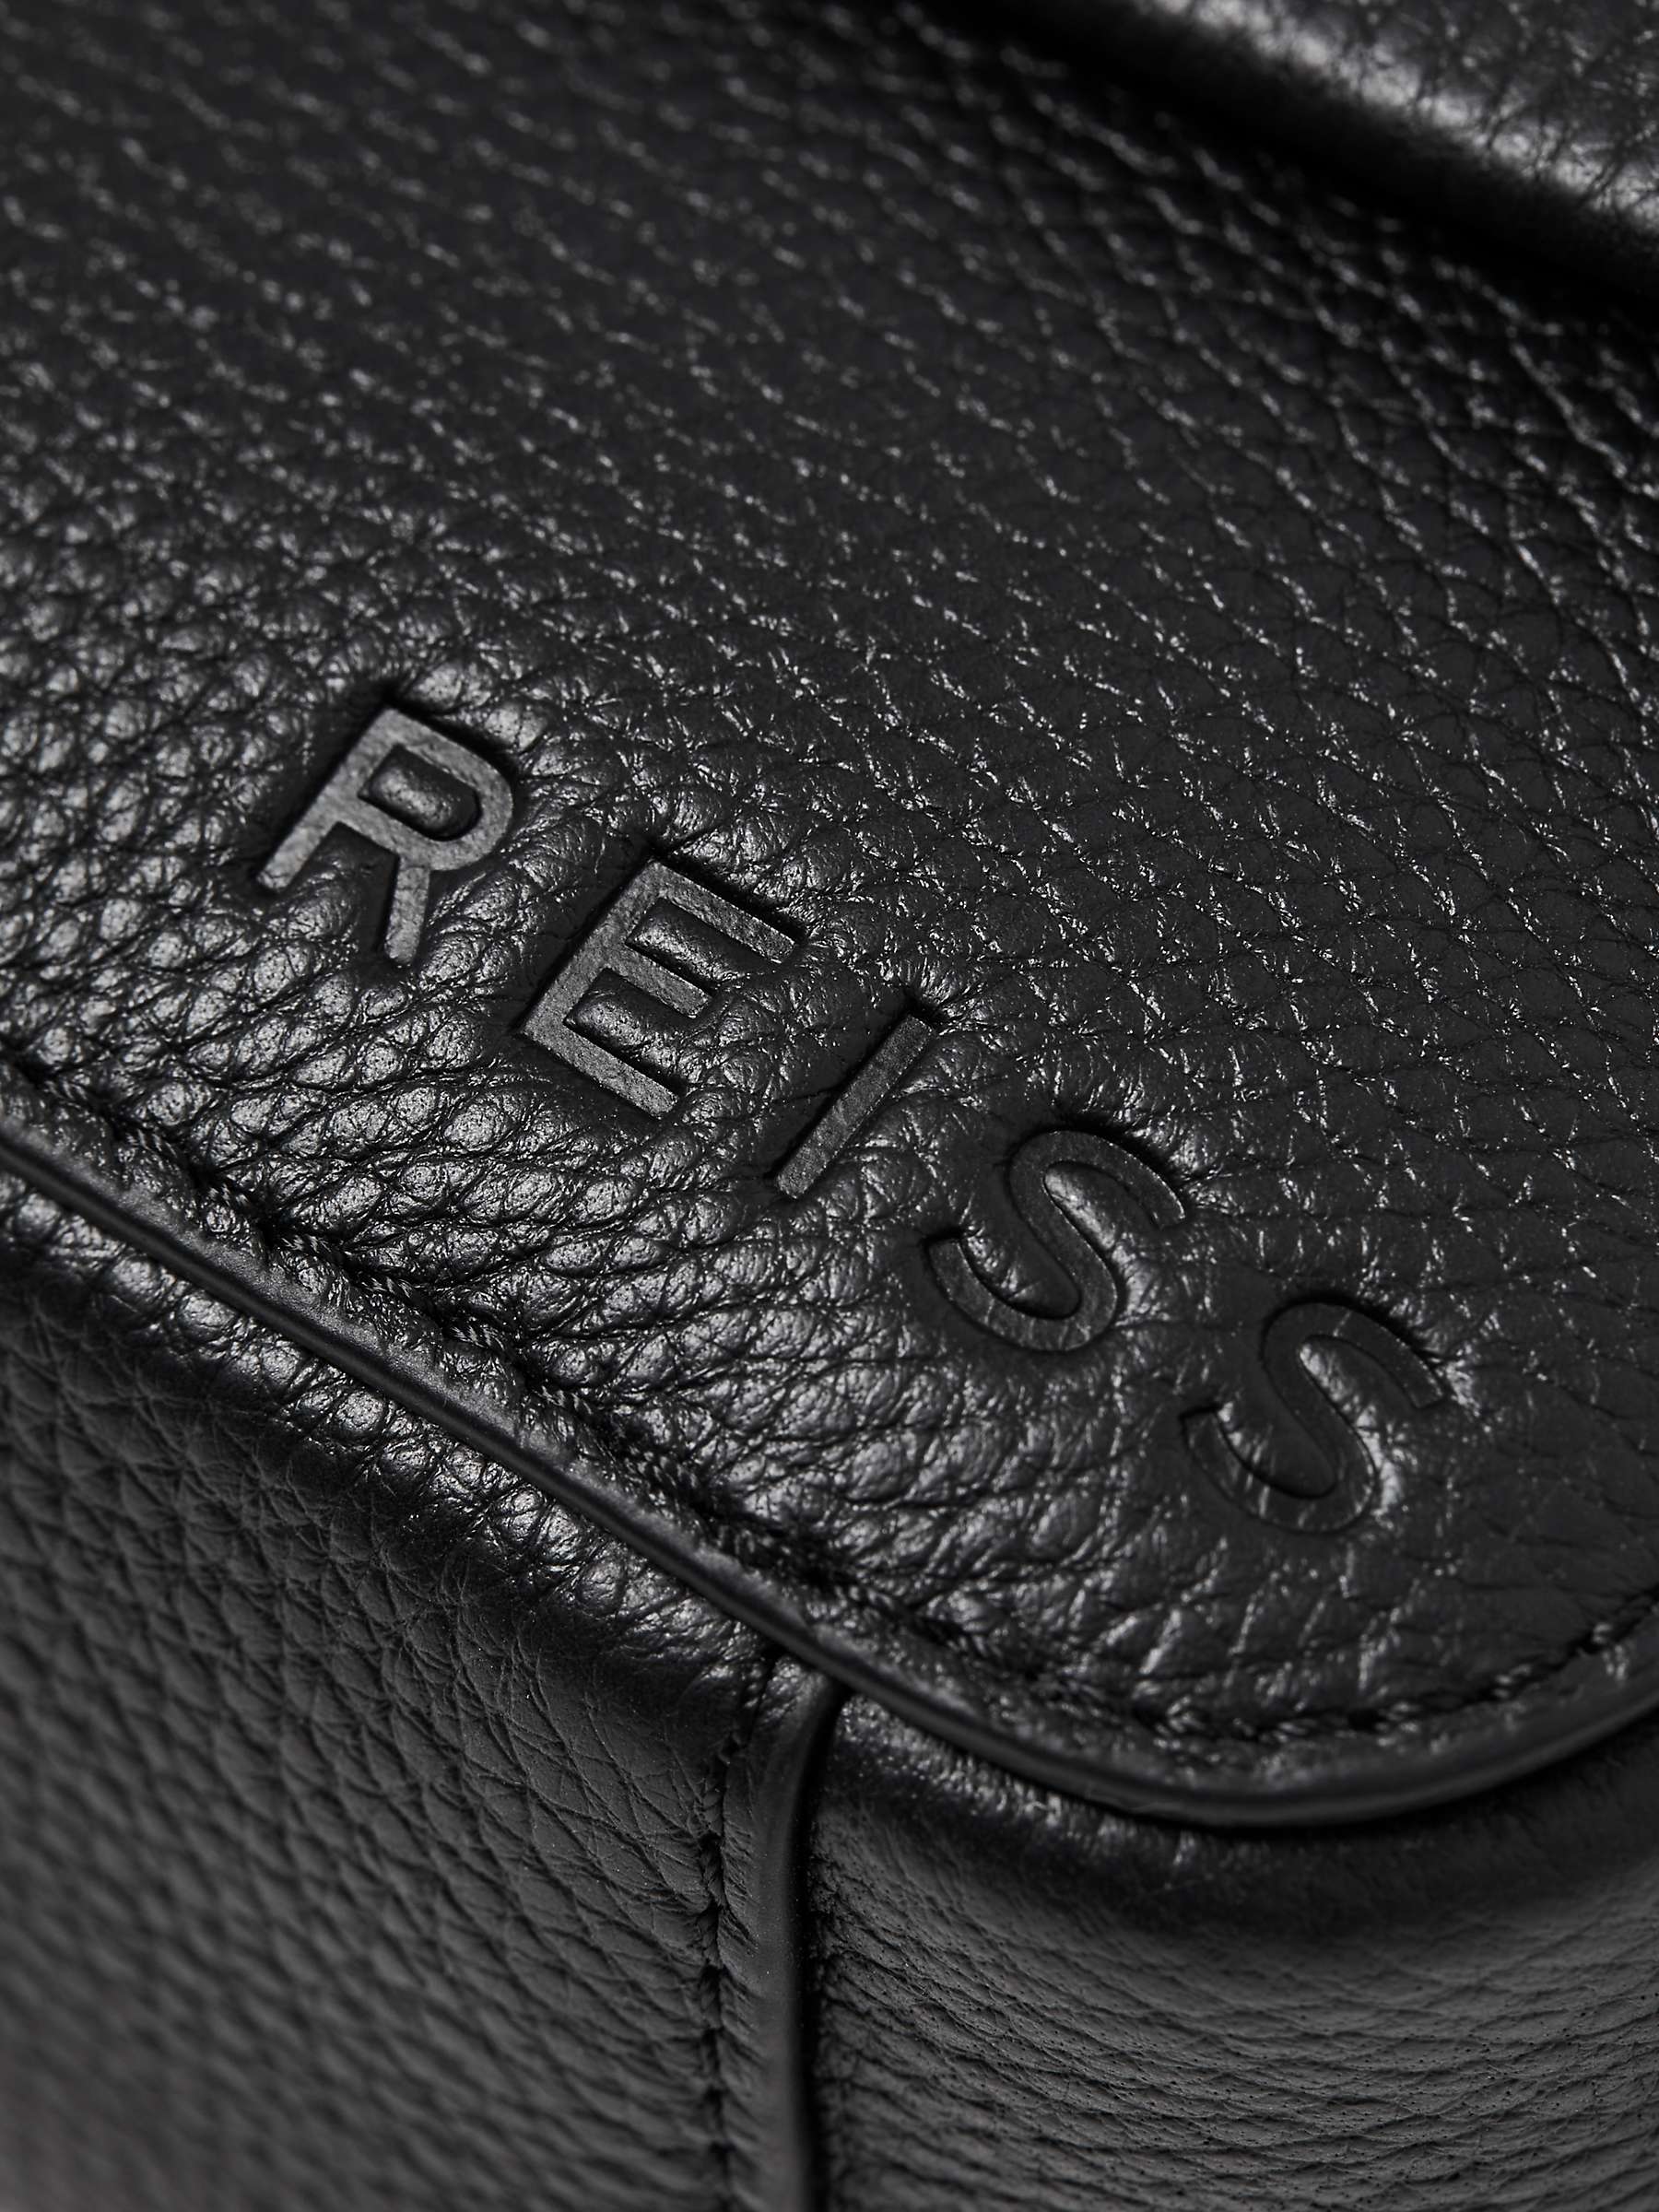 Buy Reiss Clea Leather Cross Body Camera Bag Online at johnlewis.com